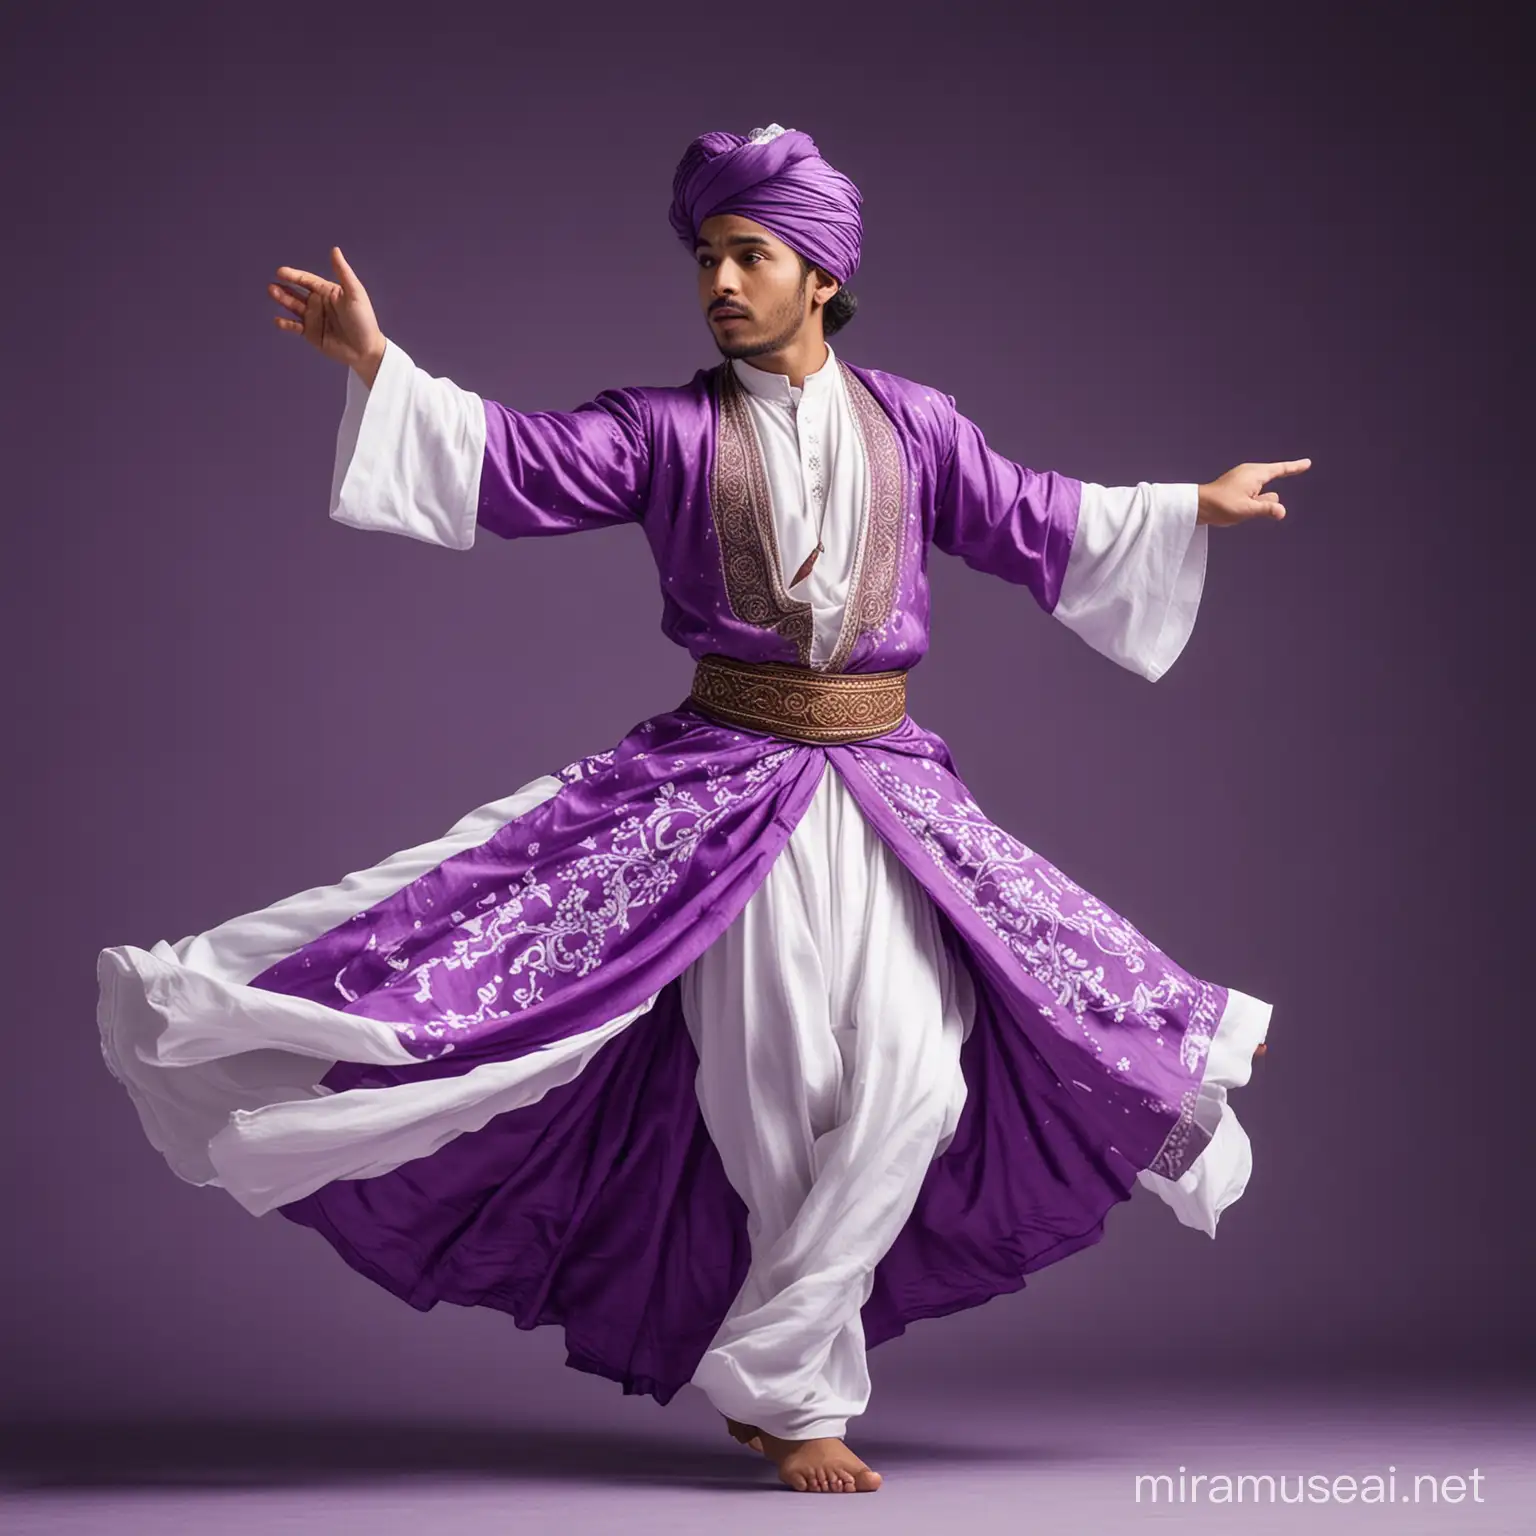 Indonesian Sufi Dancer Spinning on Luxurious Stage